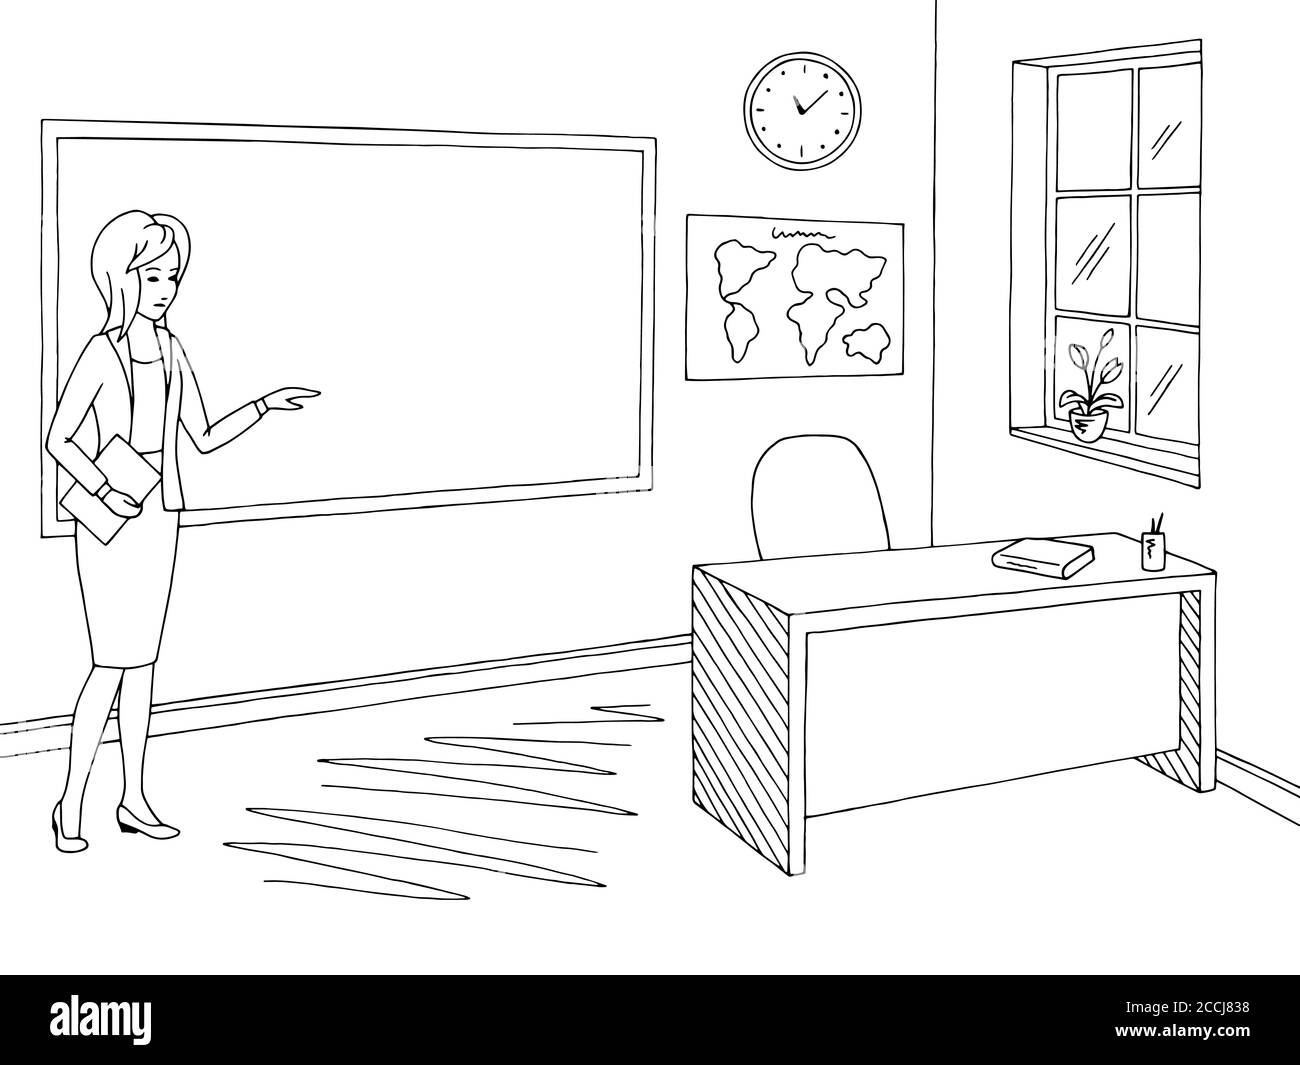 Sketch Young Teacher Student Communicate Stock Vector (Royalty Free)  112196573 | Shutterstock